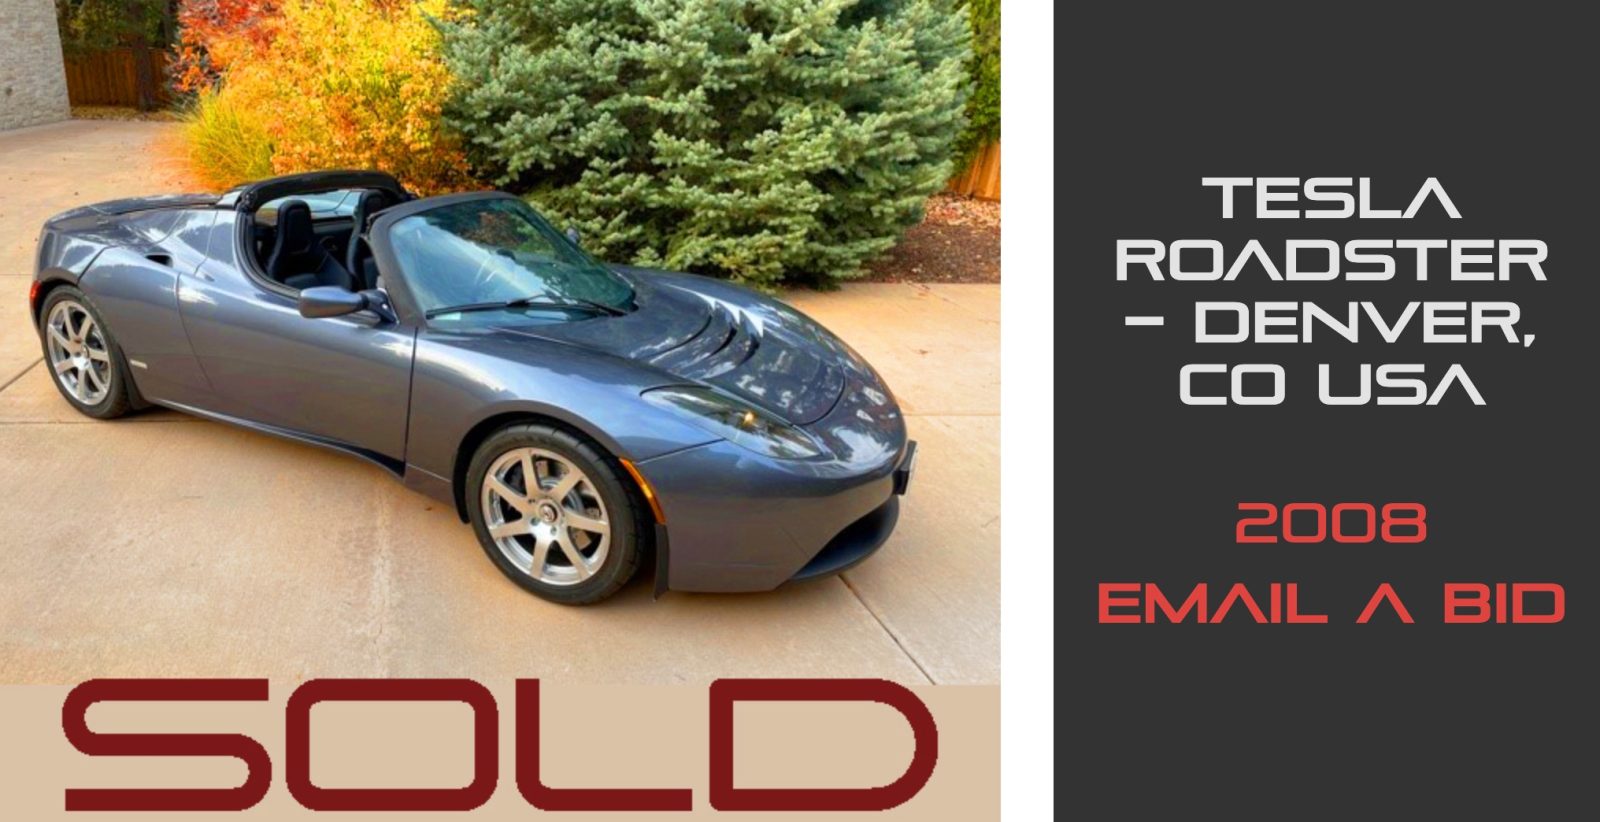 Tesla Roadster sold for over $250,000, a new for the original electric sports car is now in value | Electrek